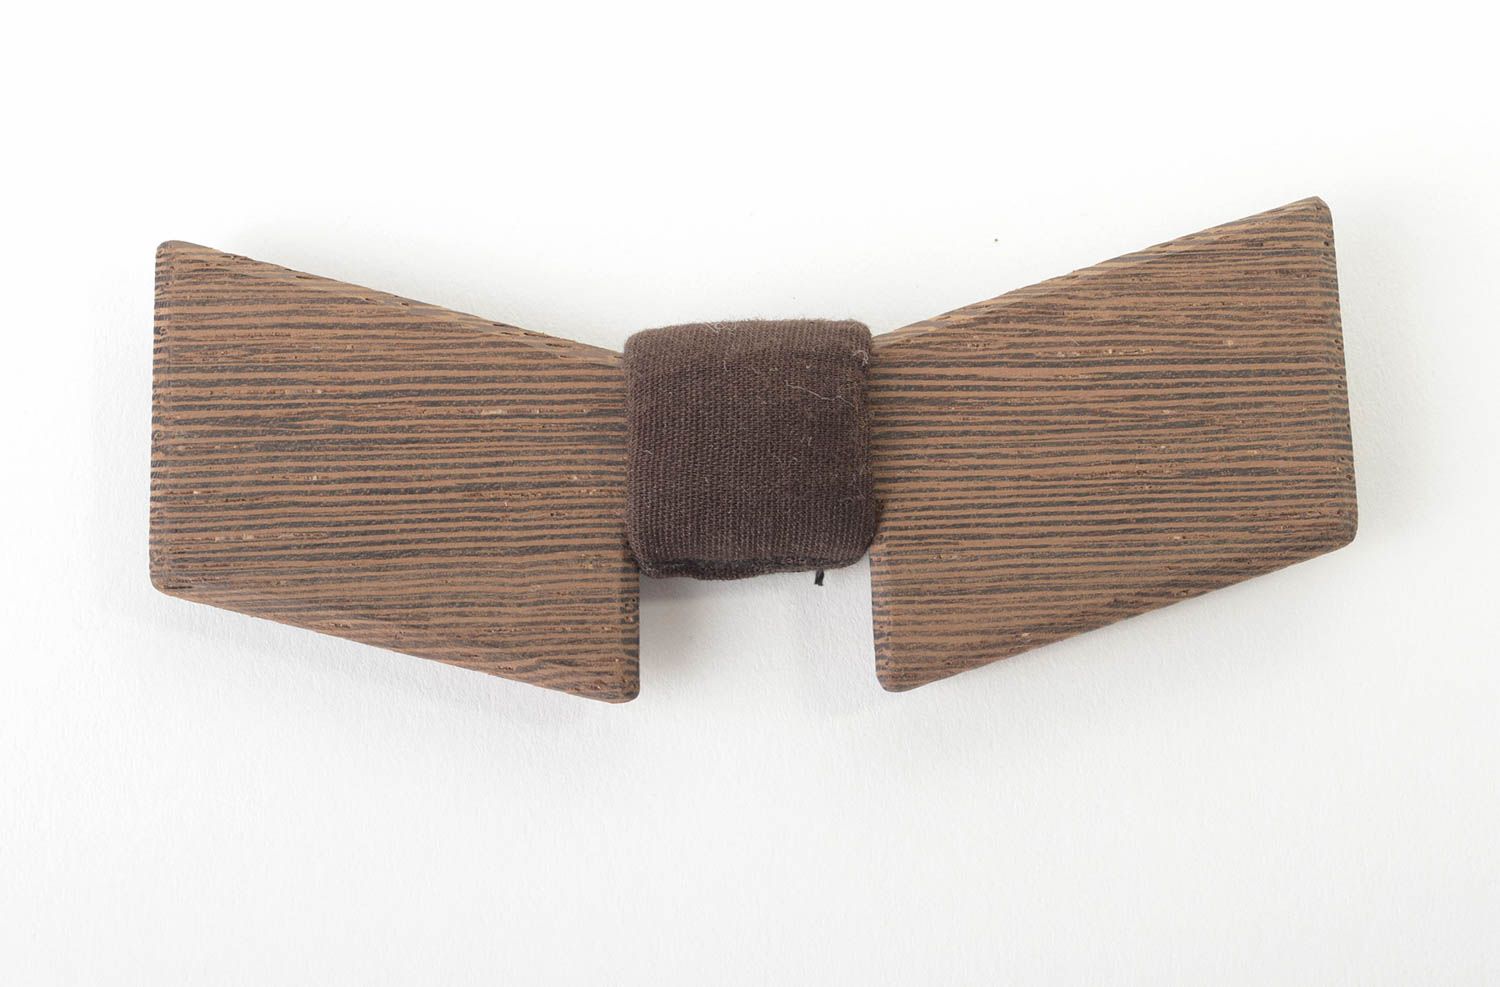 Handmade mens accessories wooden bow tie stylish bow tie gifts for him photo 4